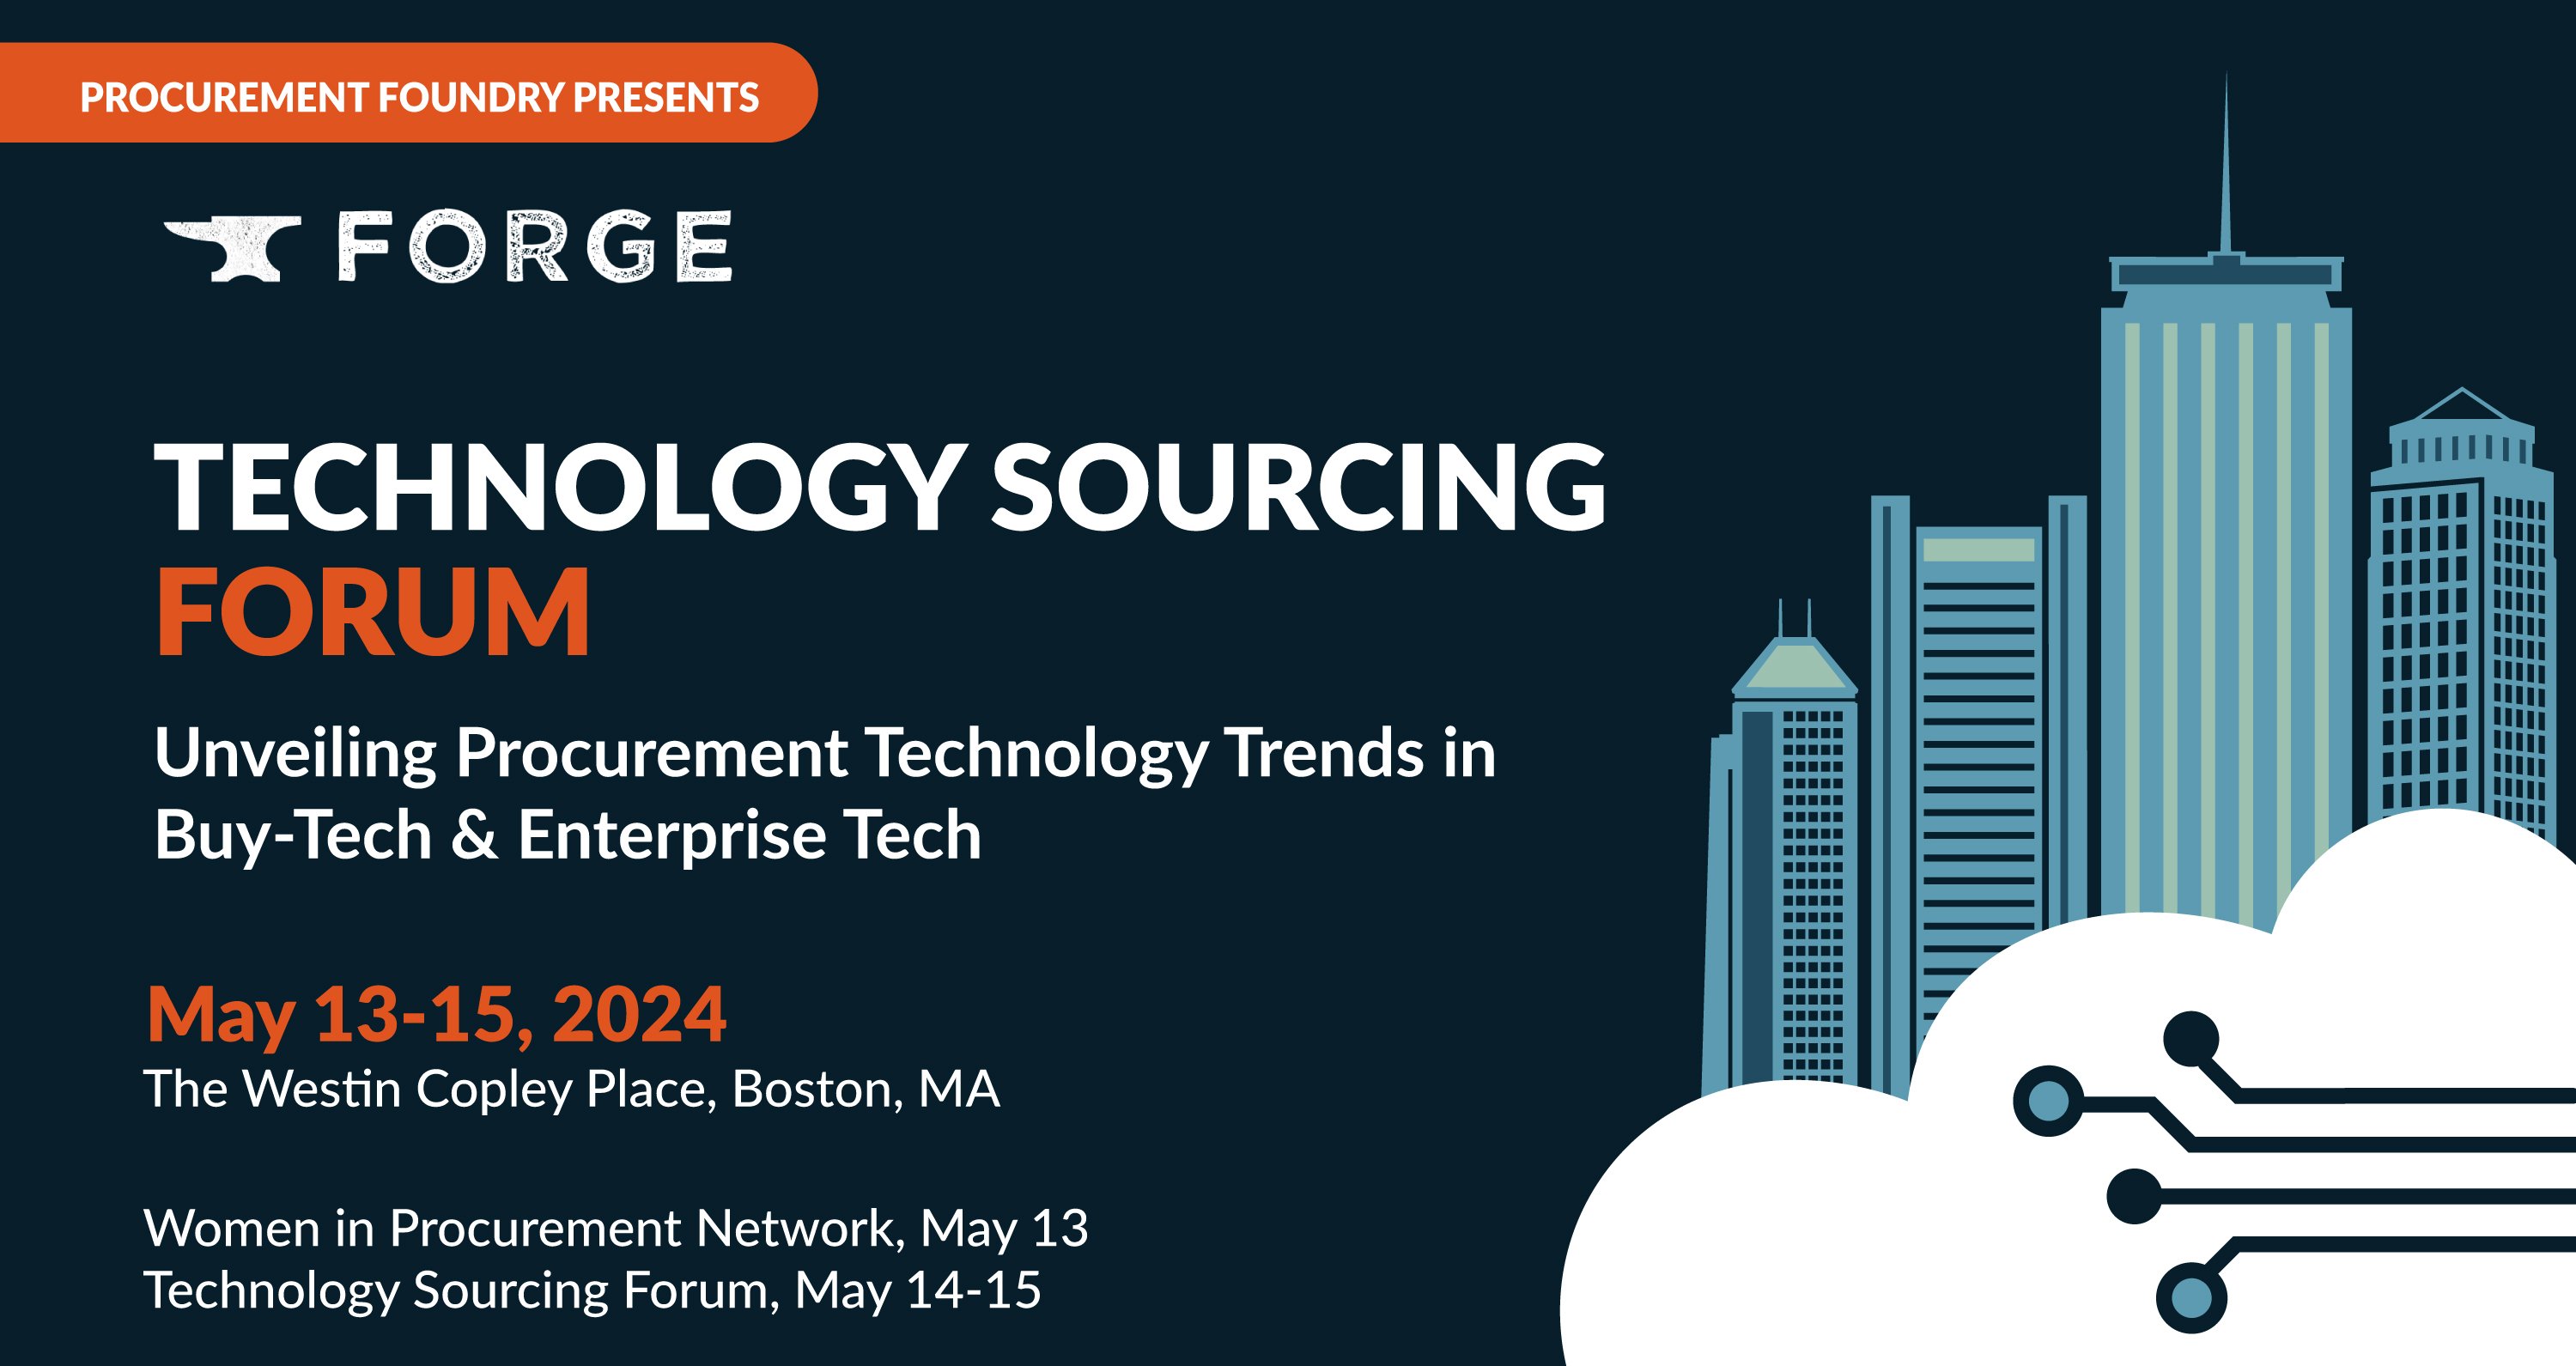 Forge-Tech-Sourcing-2024-Graphic-Boston_D2